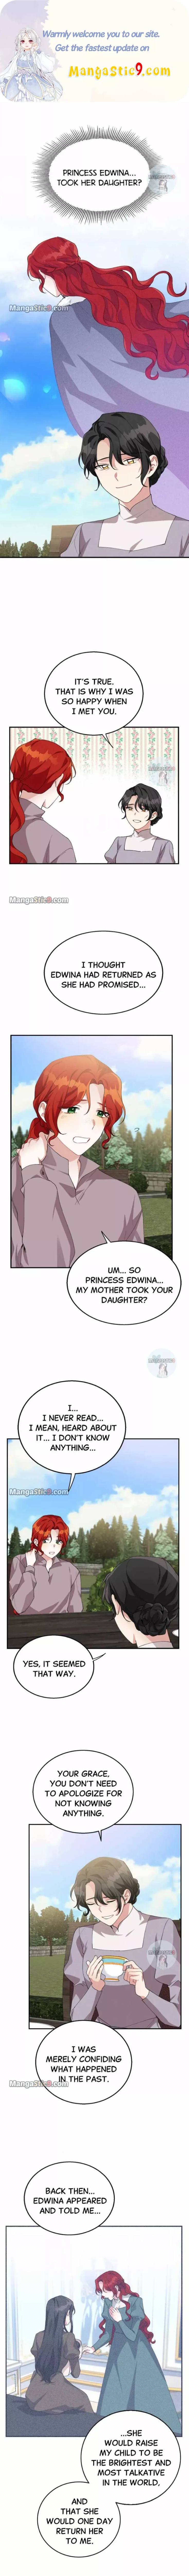 Answer Me, My Prince - Page 2